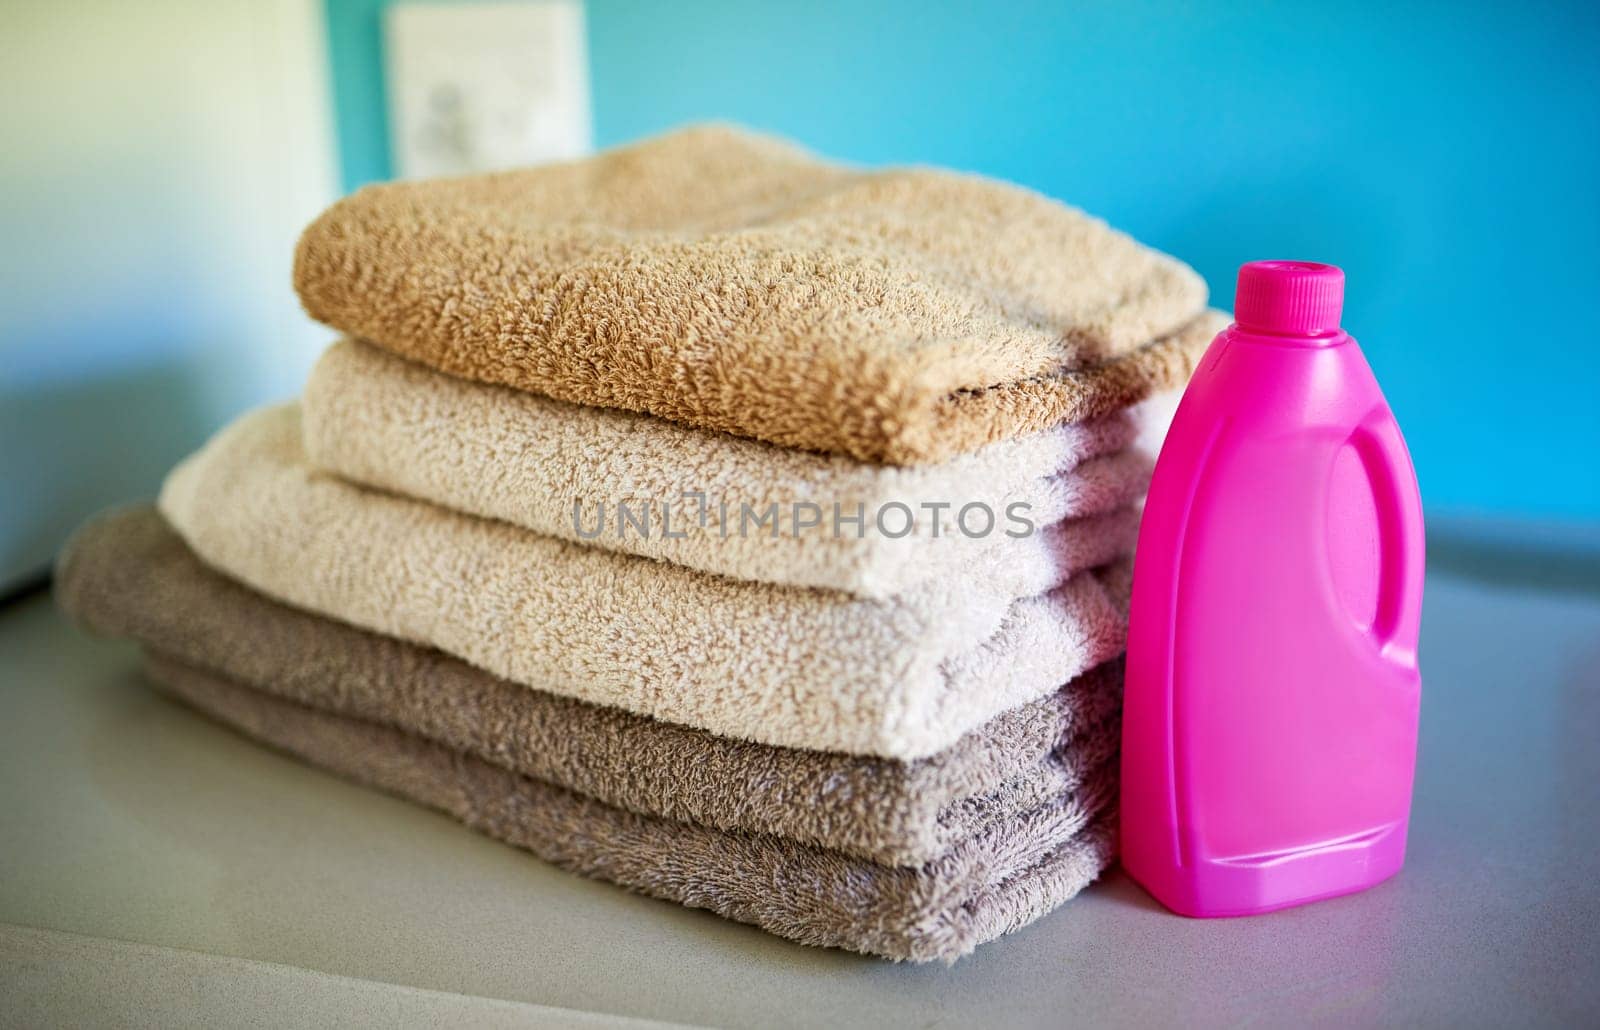 Towels, detergent and washing laundry for hygiene for spring cleaning home or bacteria, product or household. Cloth, sanitary and folded for neat organizing or soft linen cleanser, service or stack by YuriArcurs